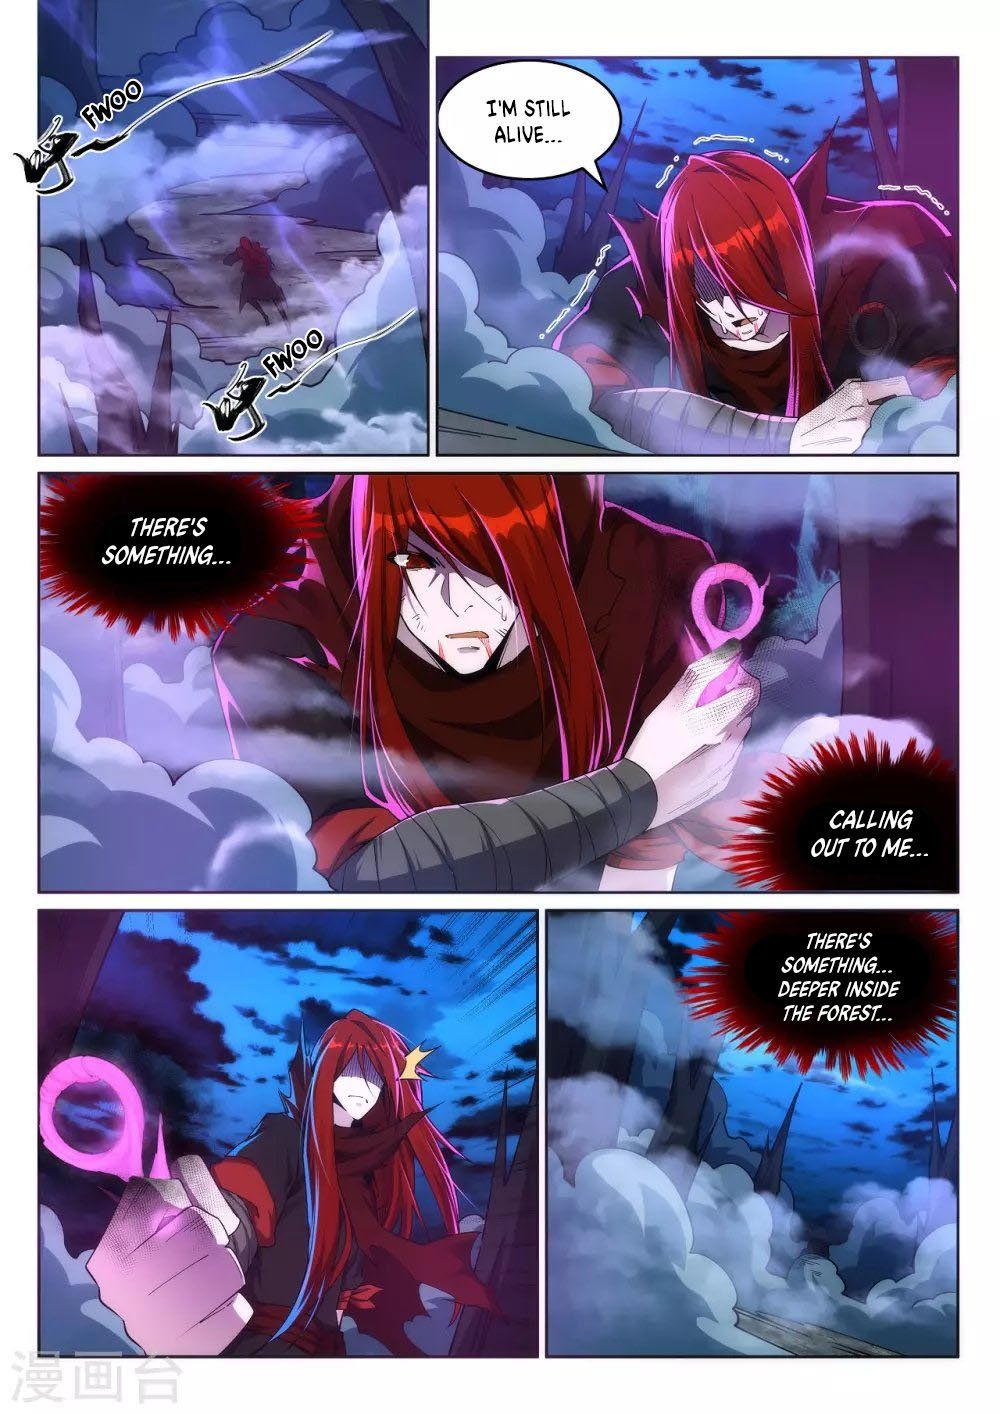 Against The Gods Chapter 209 - Page 3